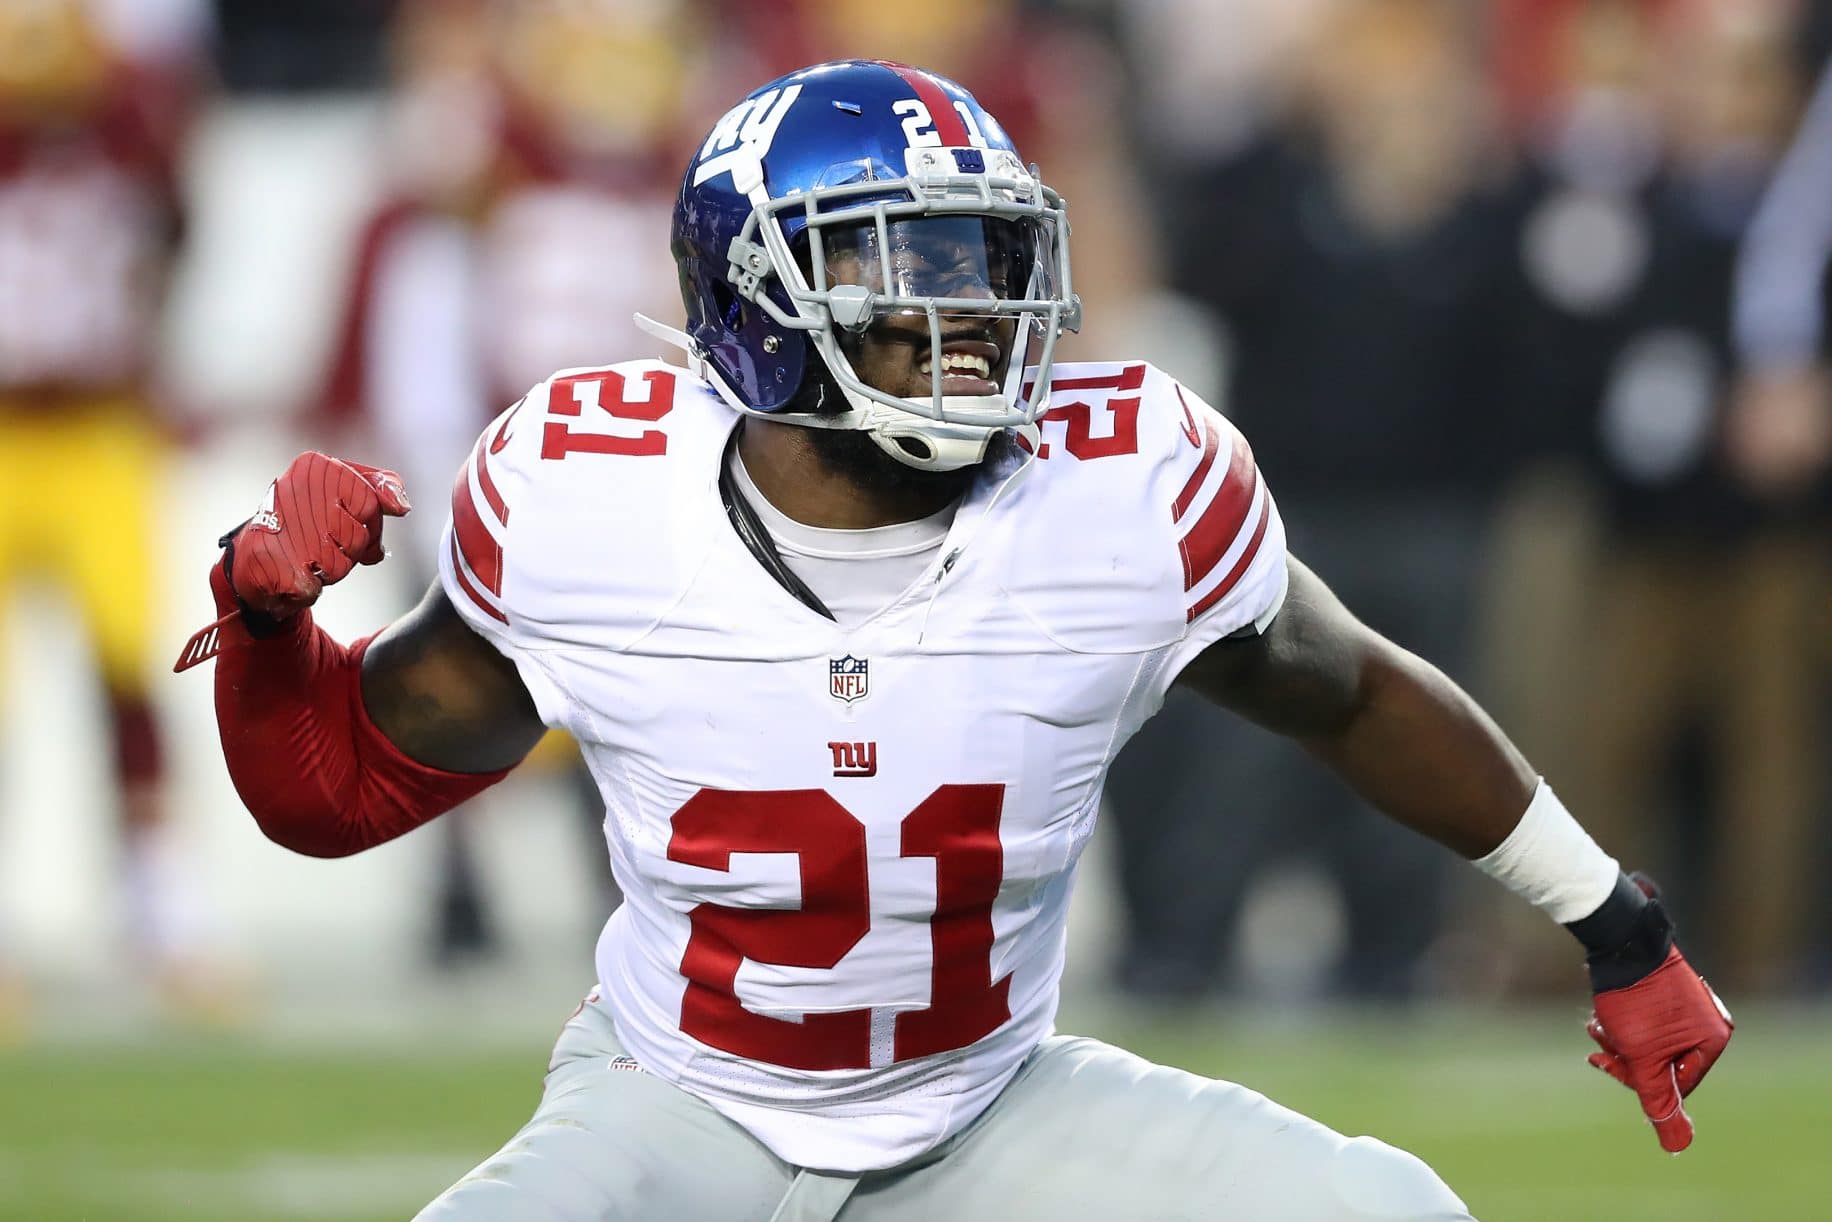 New York Giants: Landon Collins is Big Blue's only Pro Bowl selection